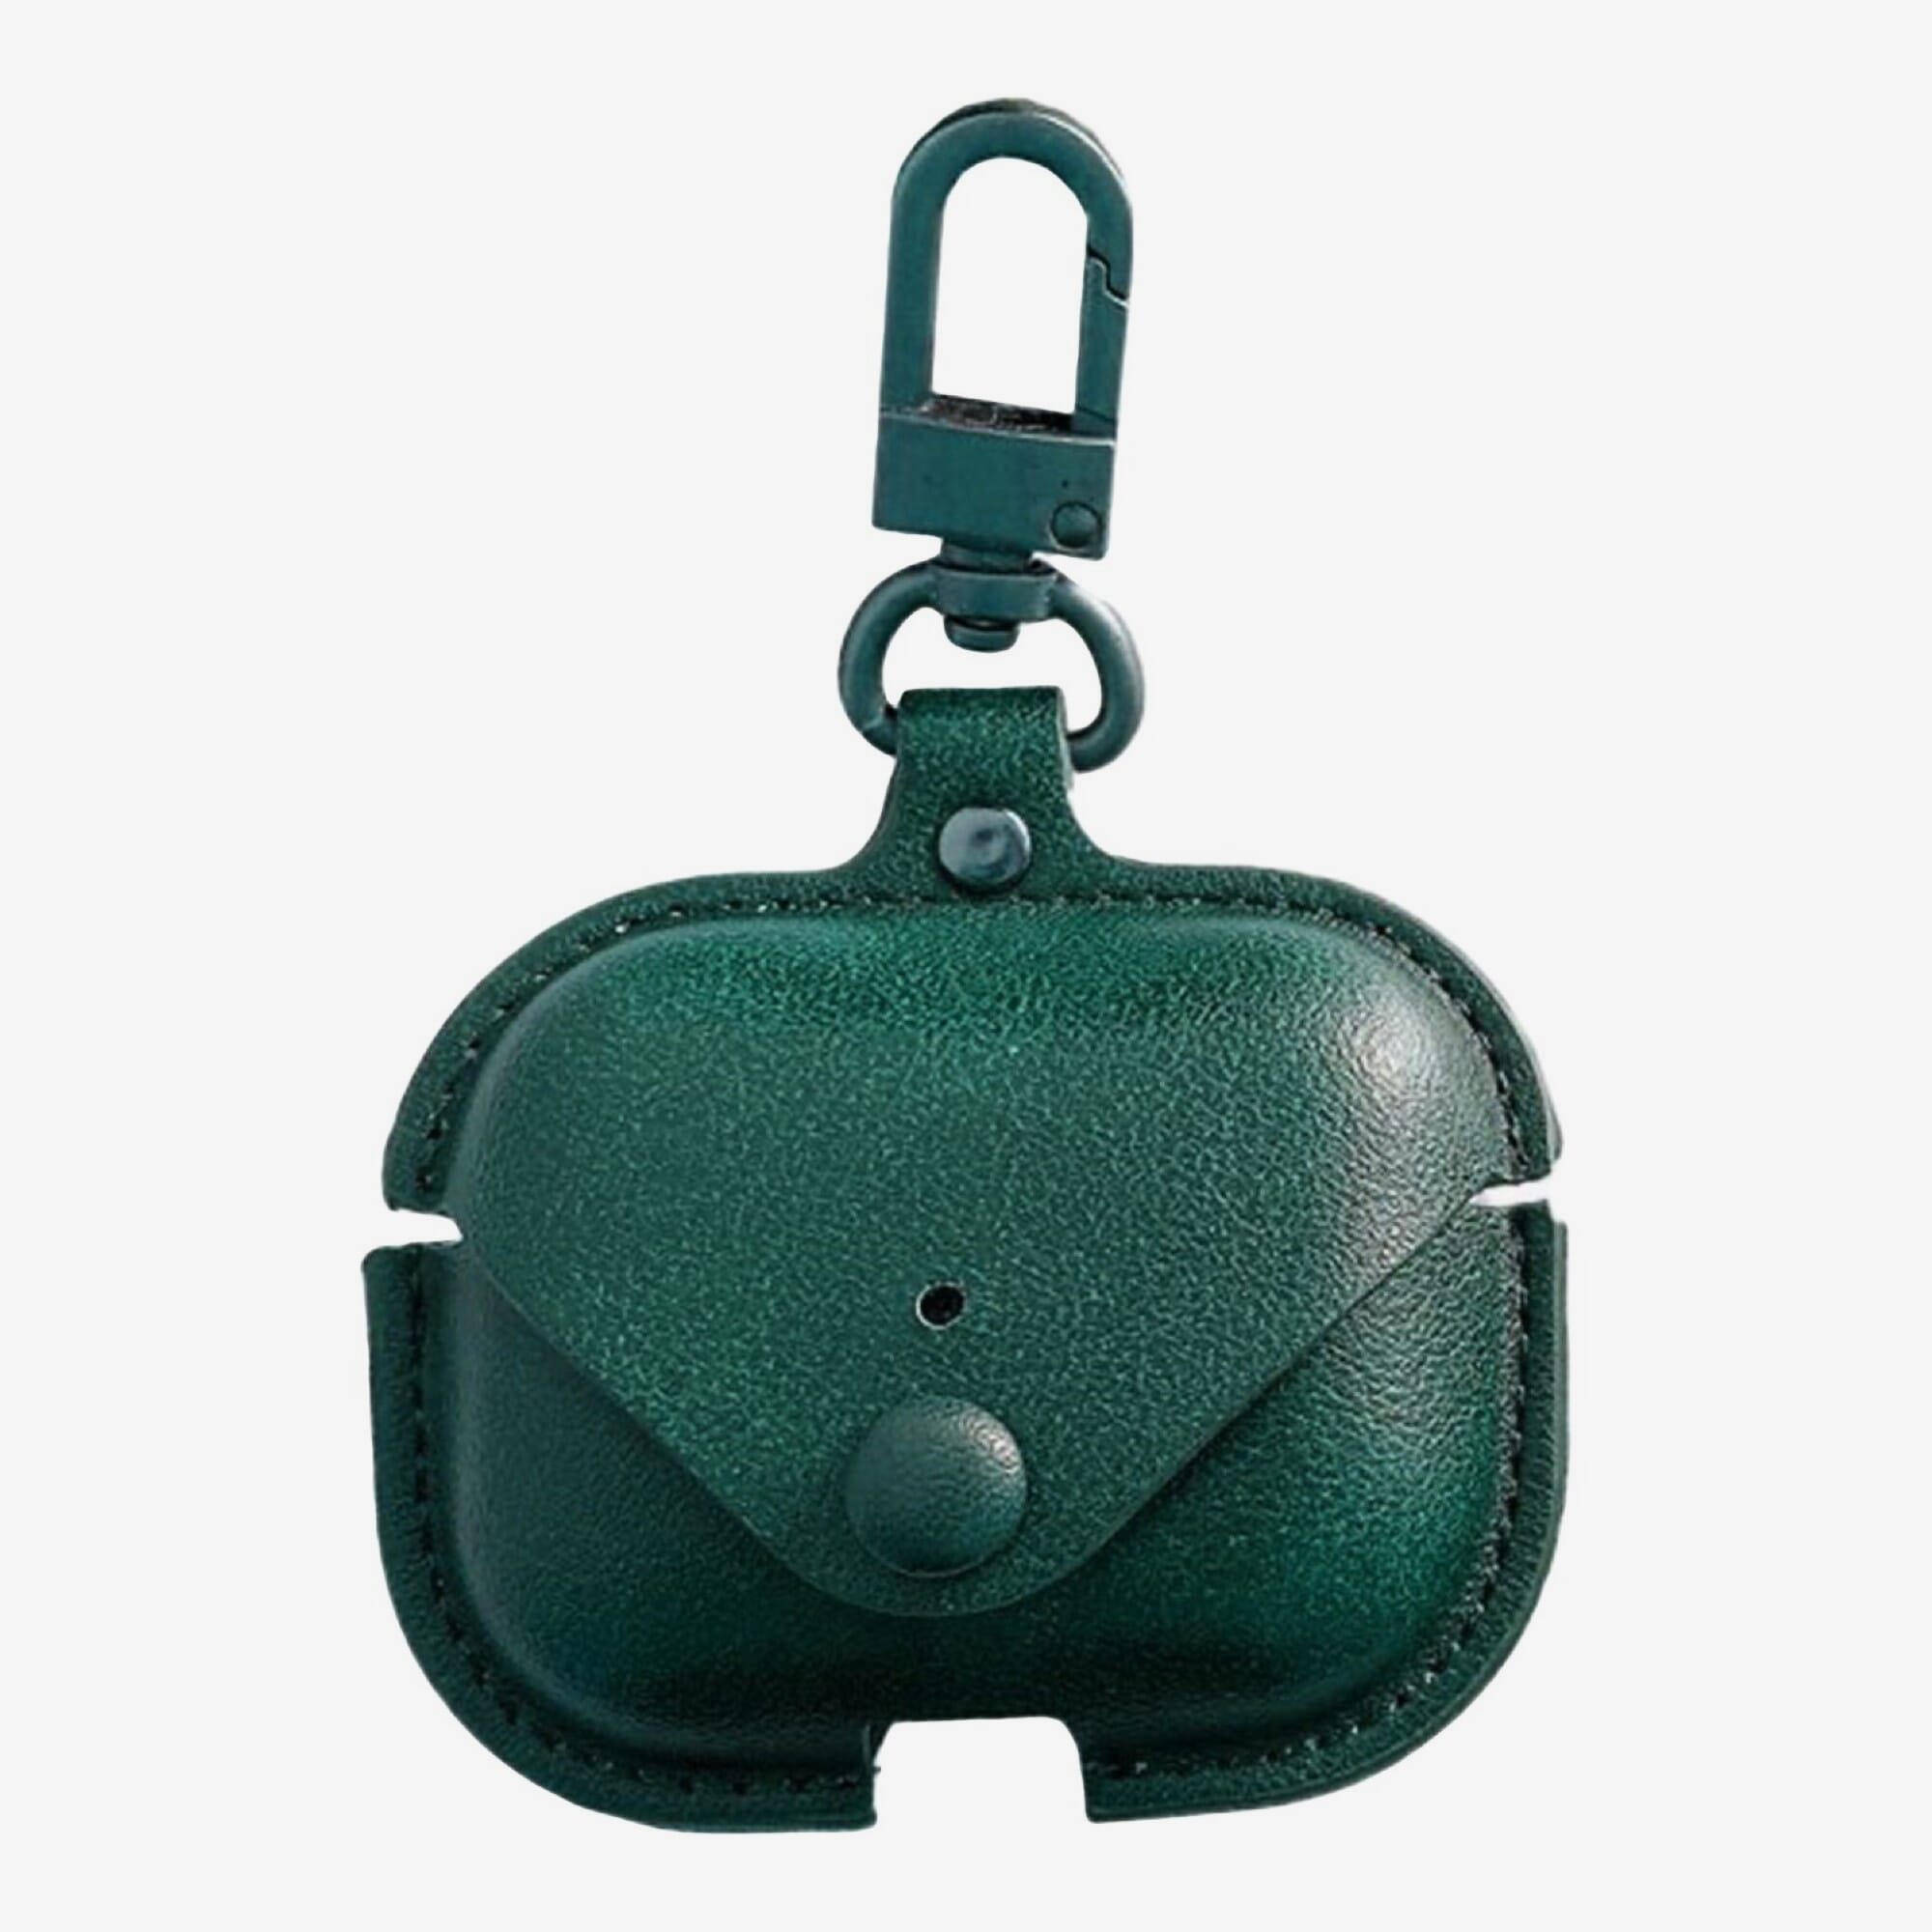 This Louis Vuitton Bag For Your AirPods Pro Lets You Flex Twice As